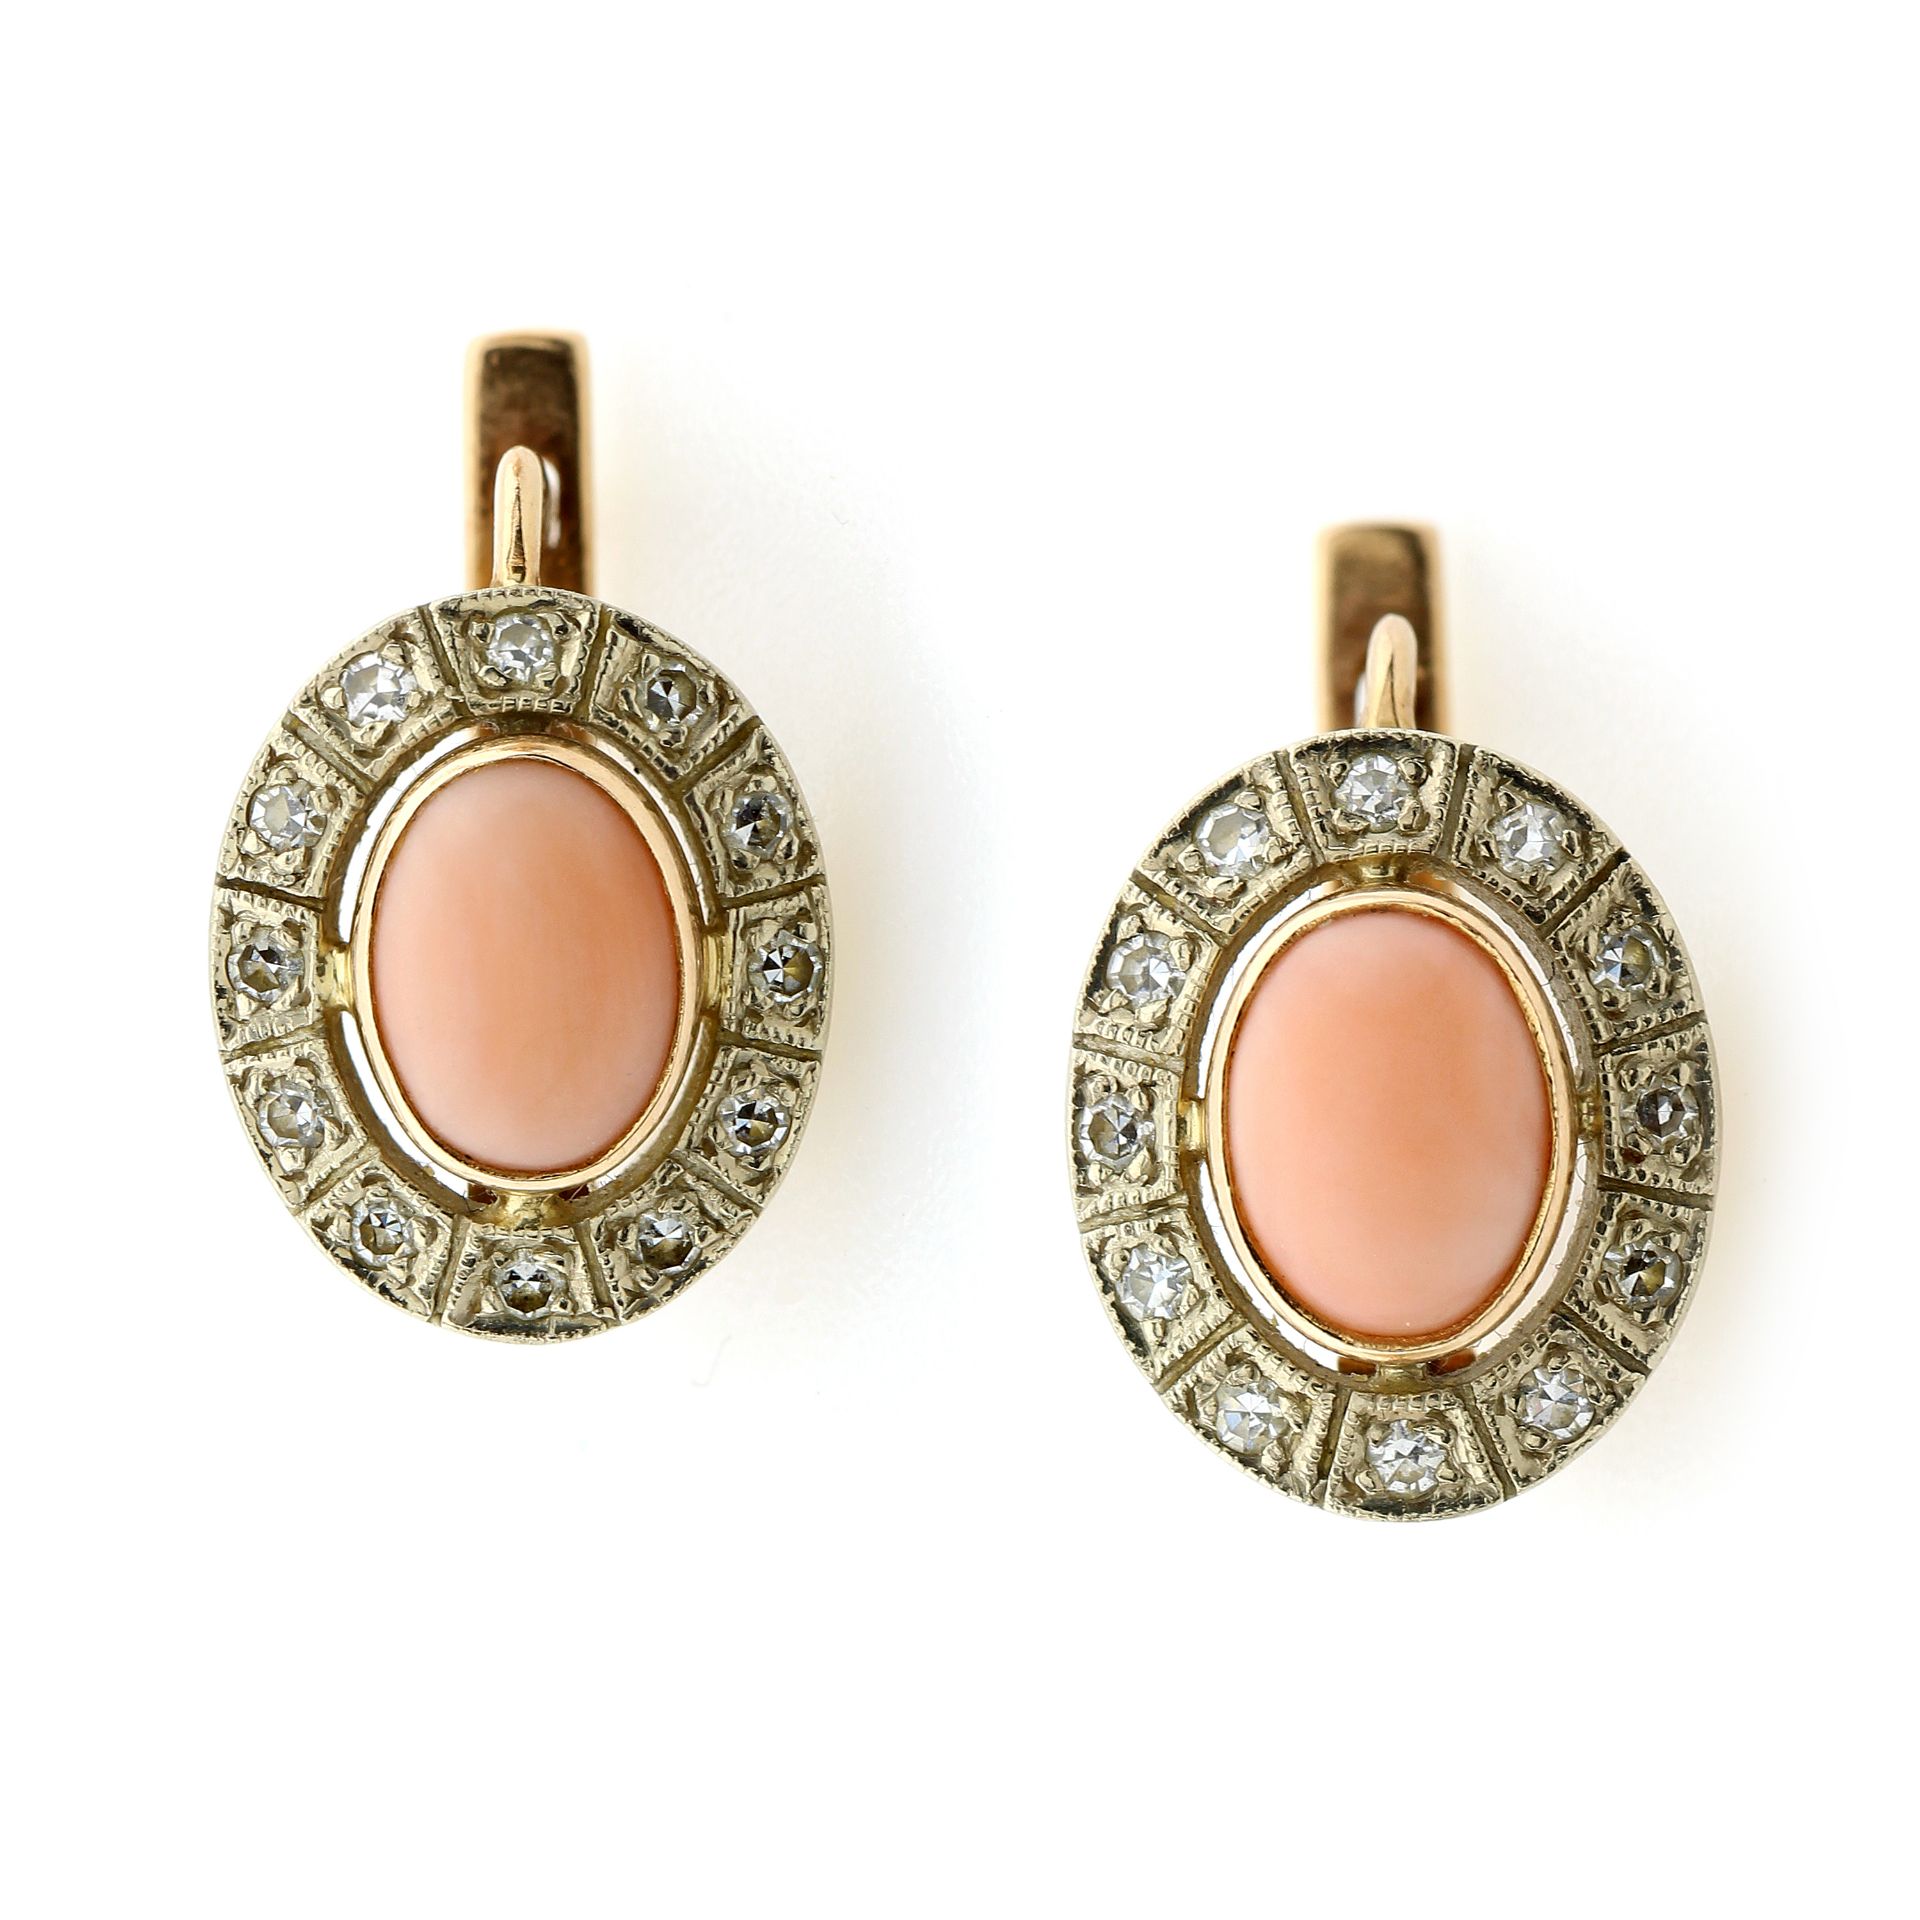 A PAIR OF CORAL AND DIAMOND EARRINGS, CIRCA 1960 in 14ct yellow gold, each set with an oval coral